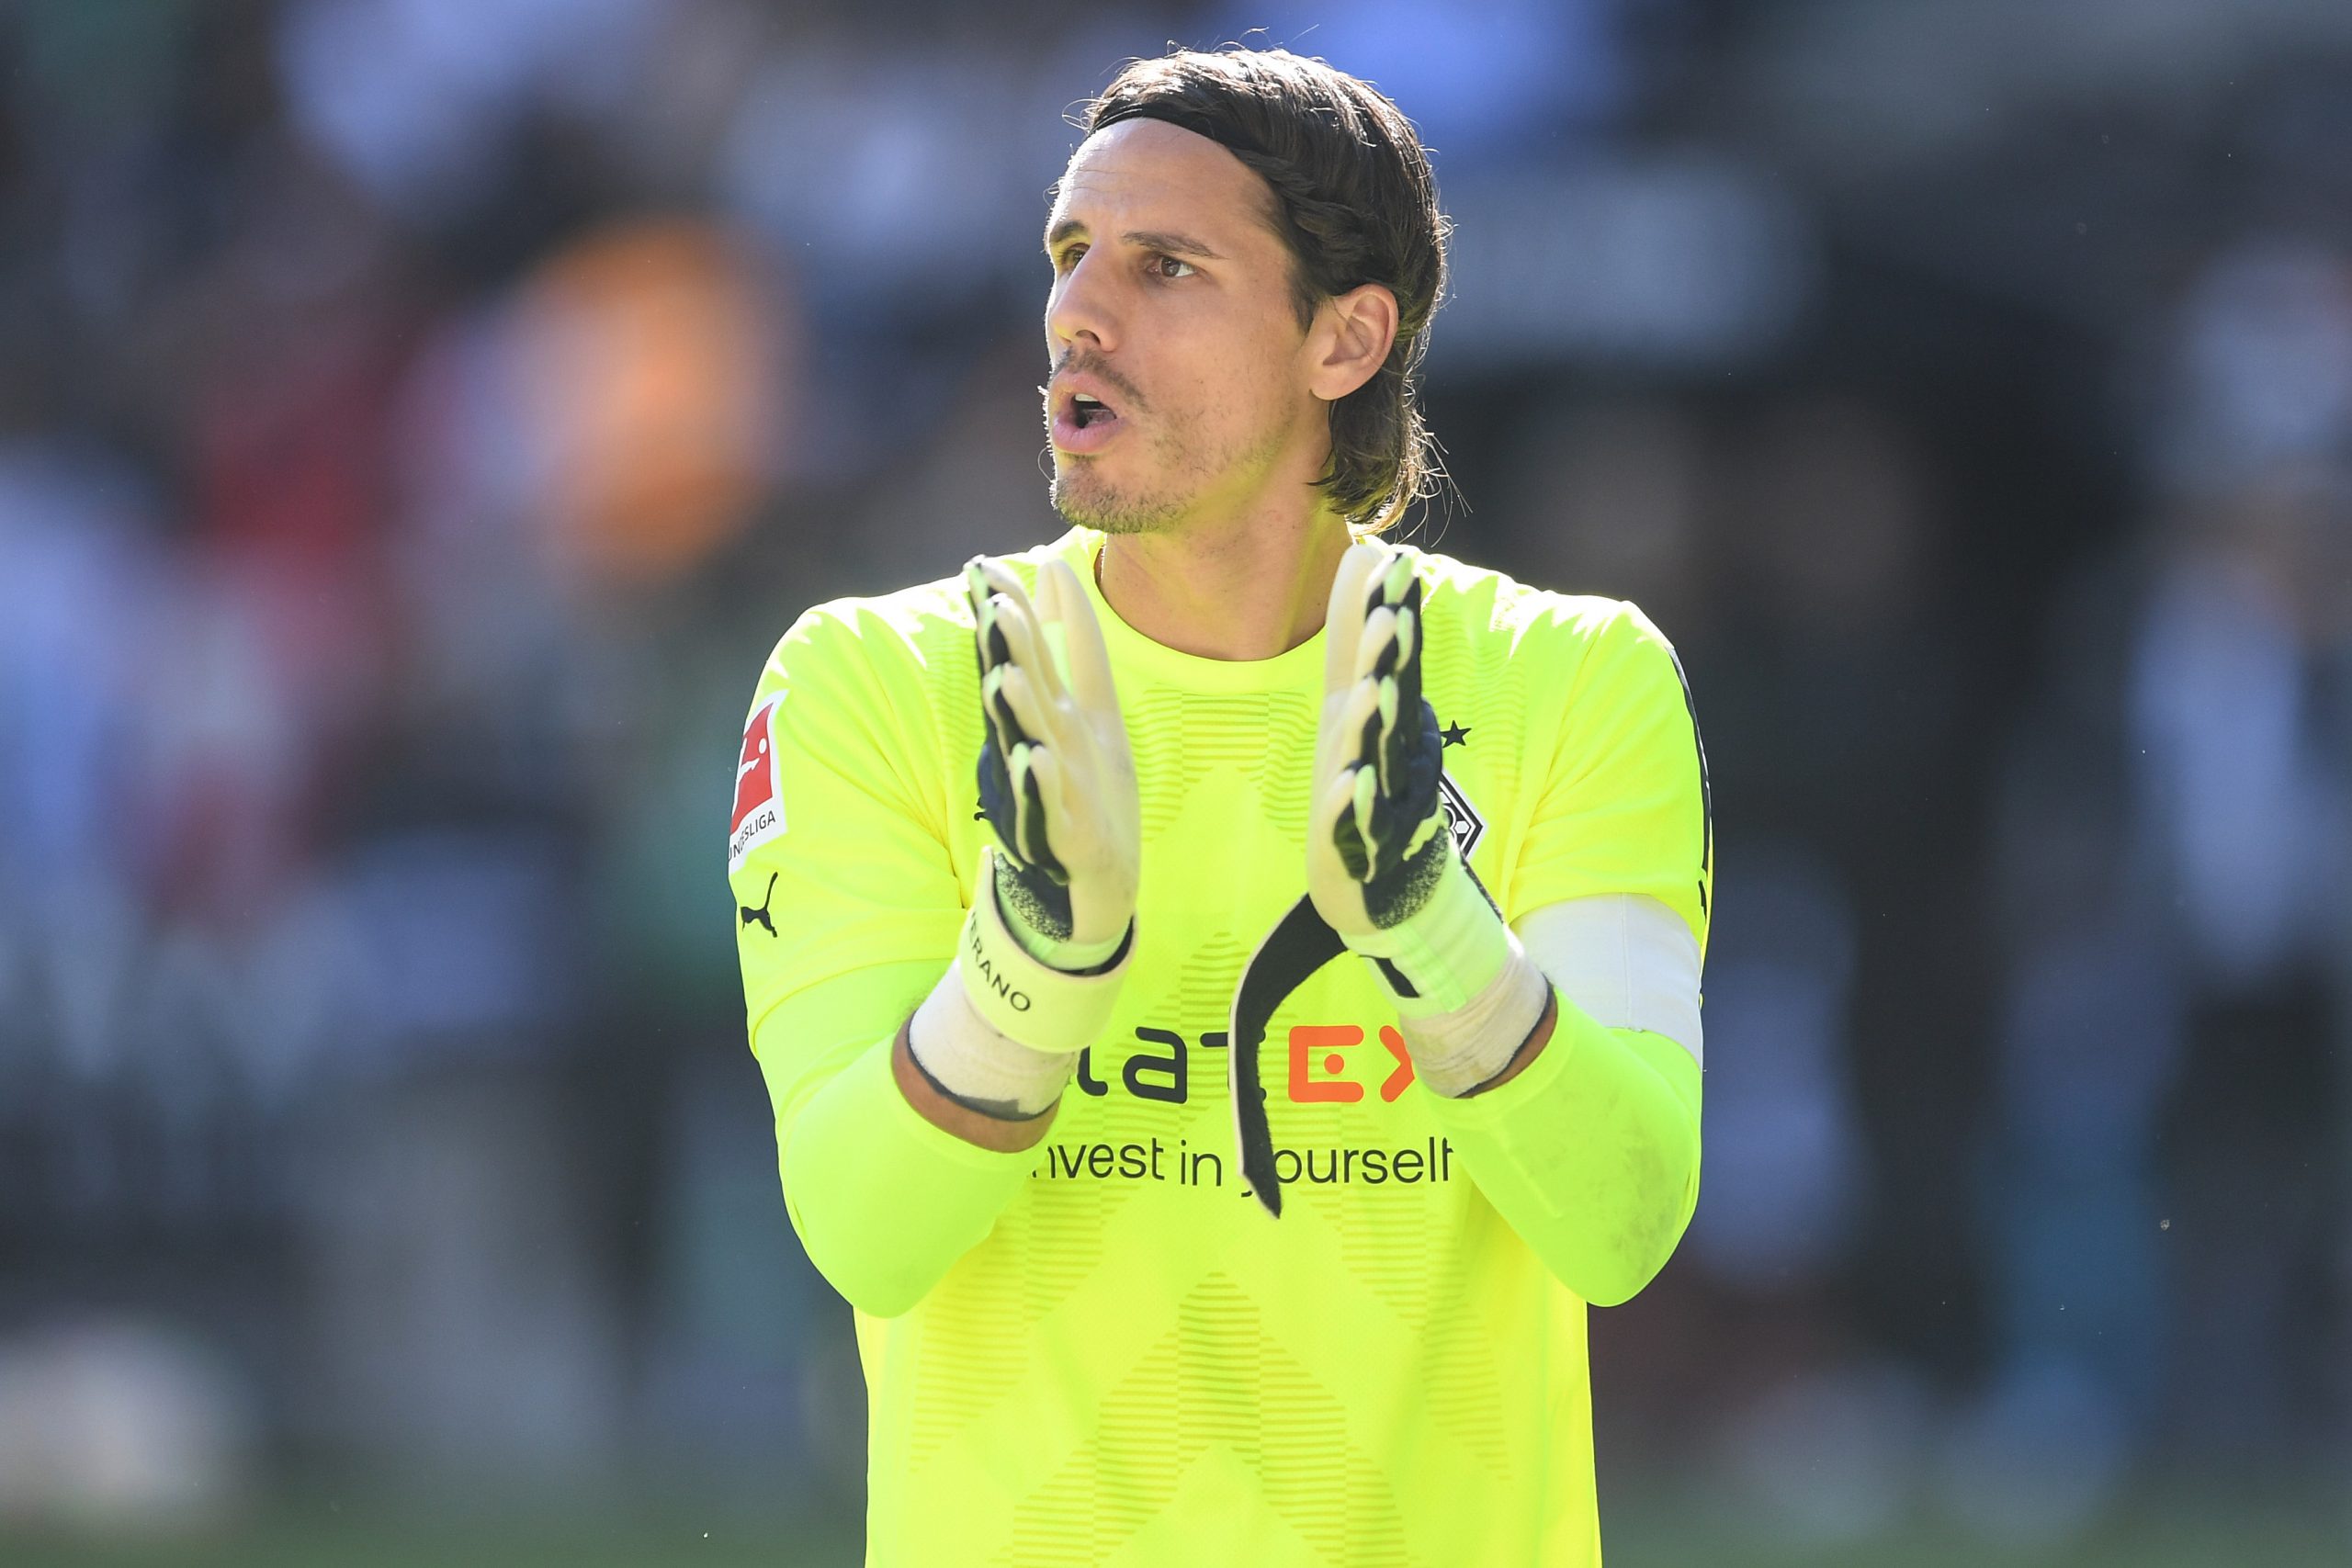 Yann Sommer is of interest to Manchester United. (Photo by Frederic Scheidemann/Getty Images)